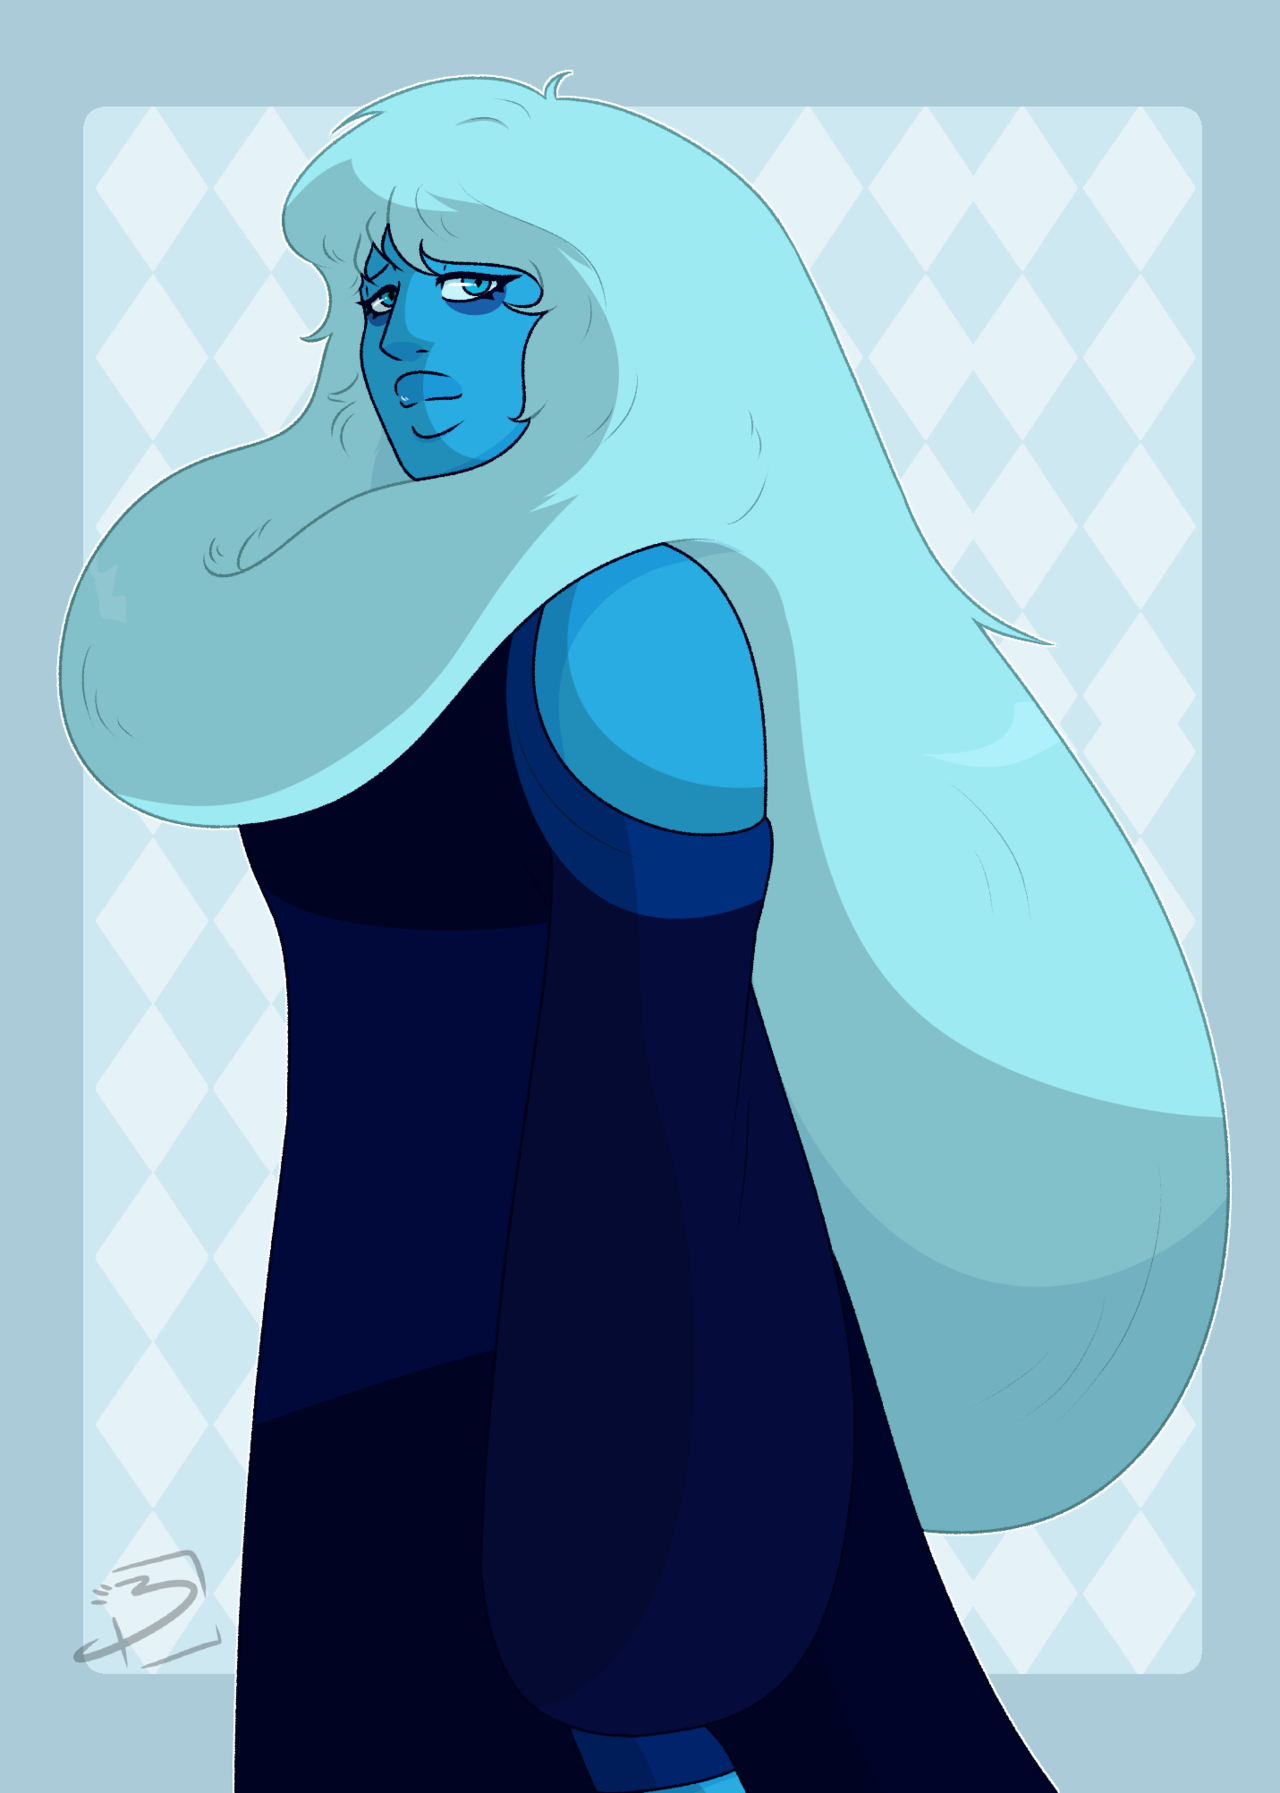 Sometimes, I take my time to draw one of the Diamonds.